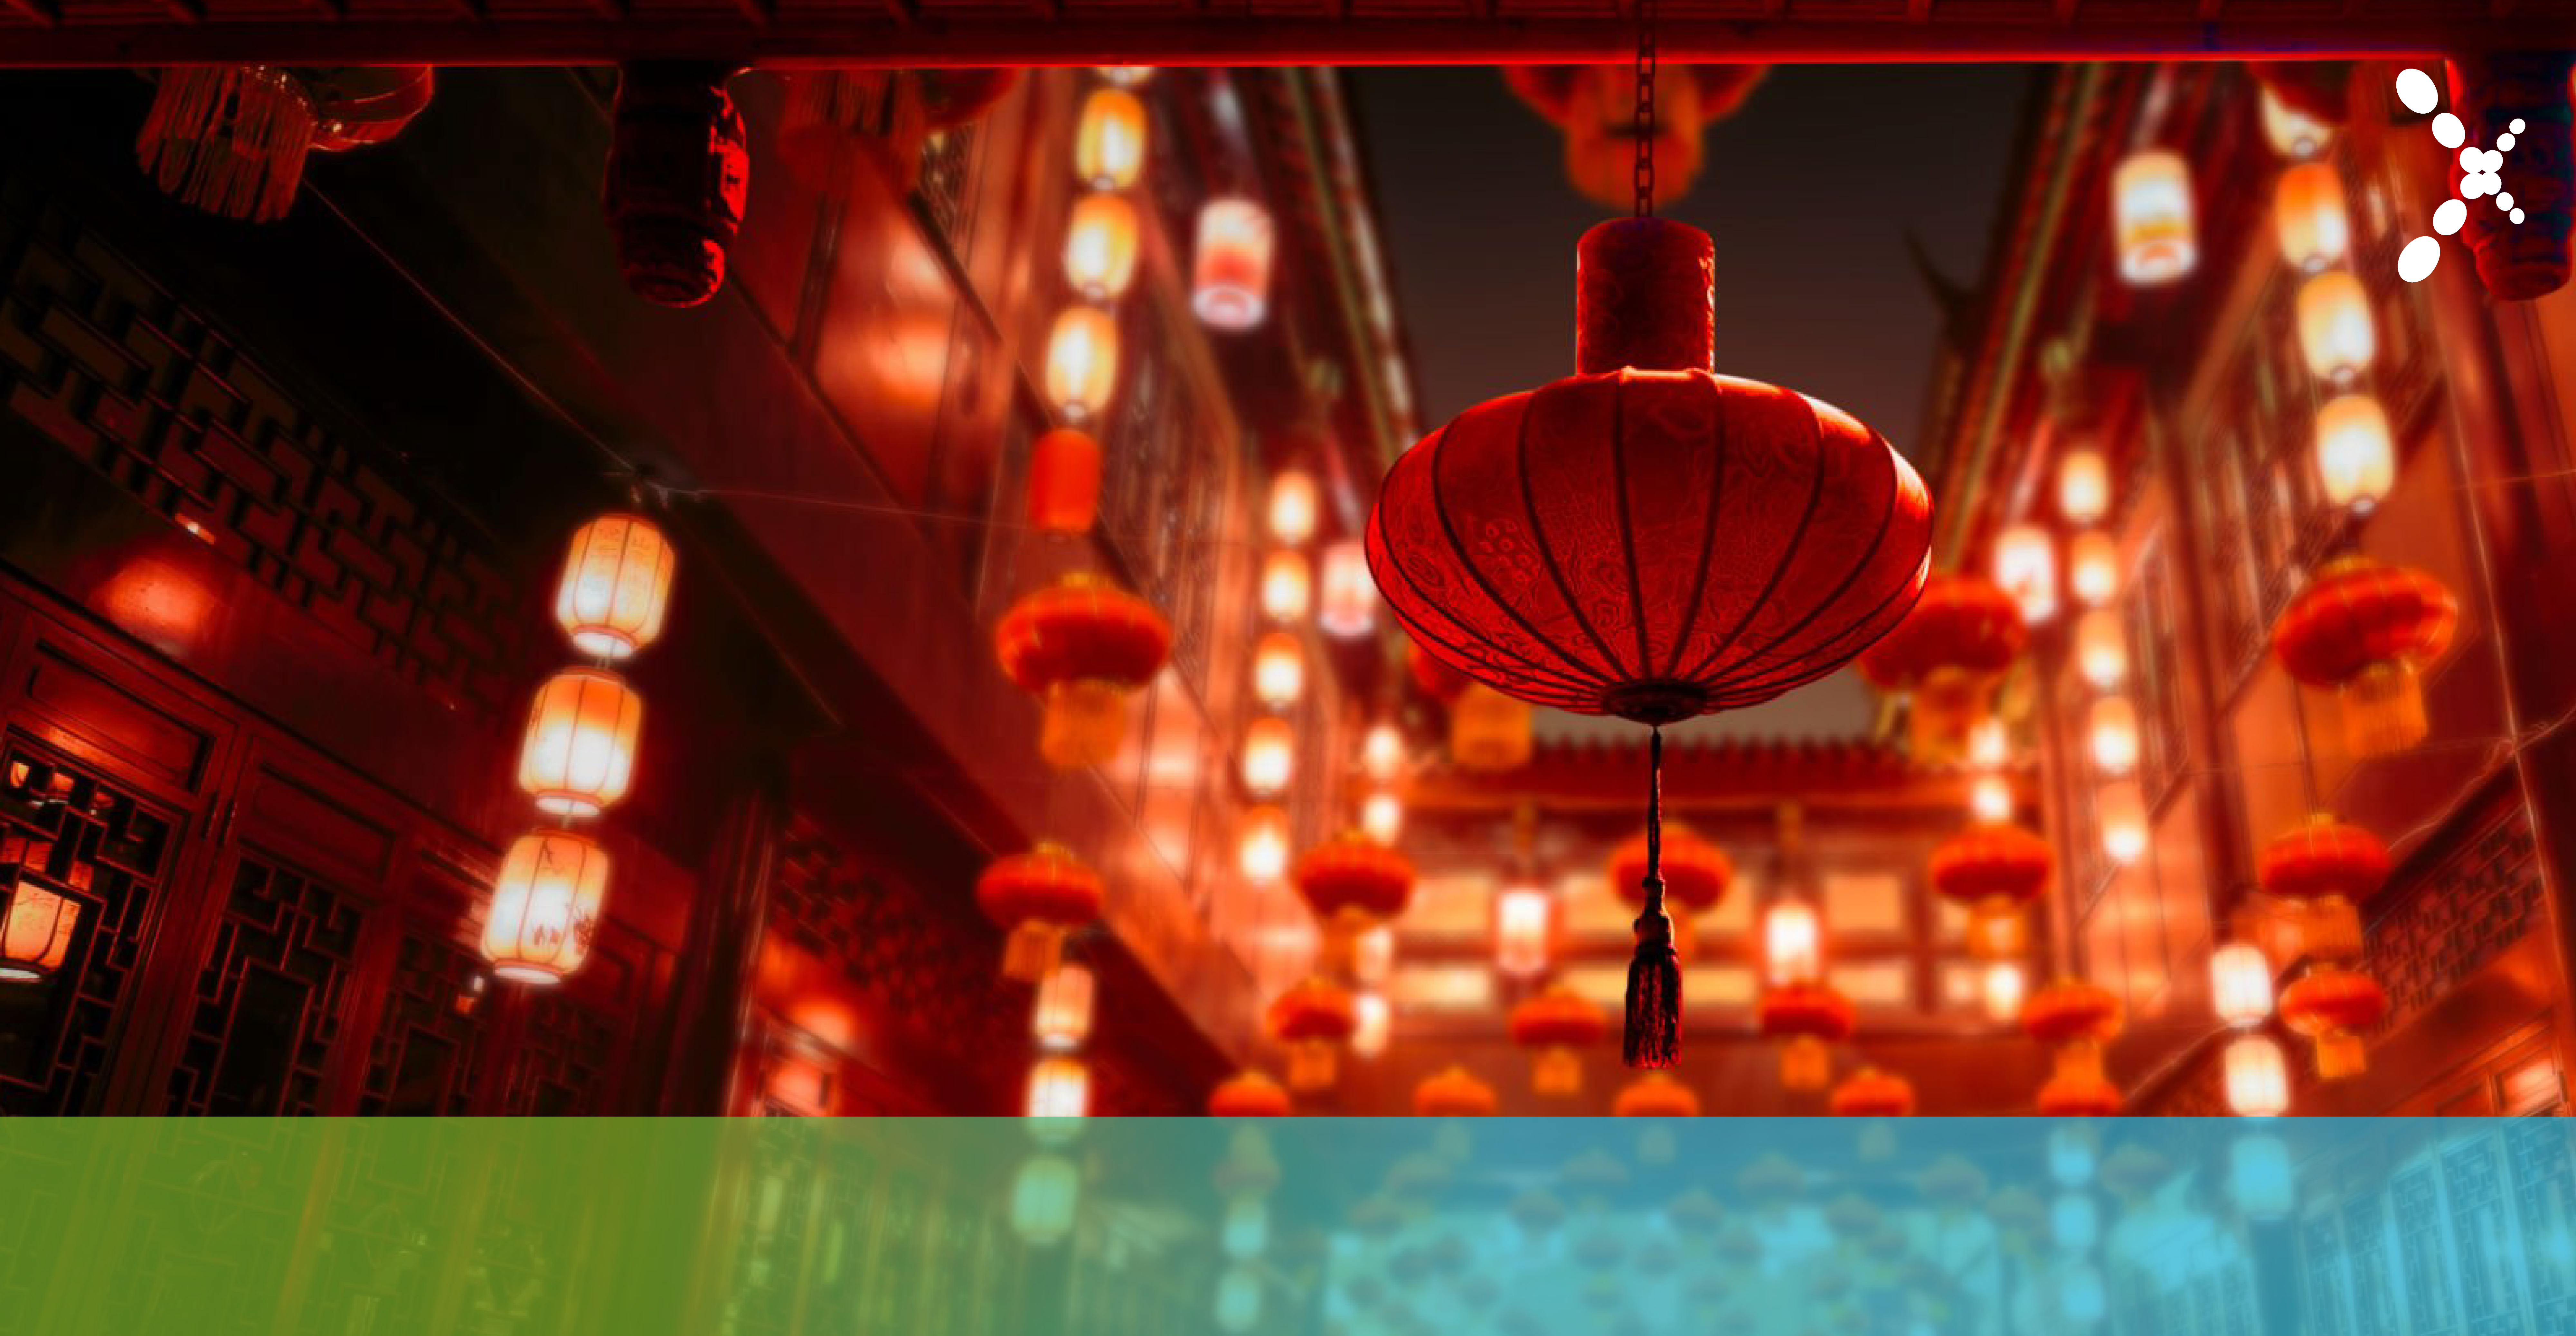 Get your business prepared for the Chinese New Year!